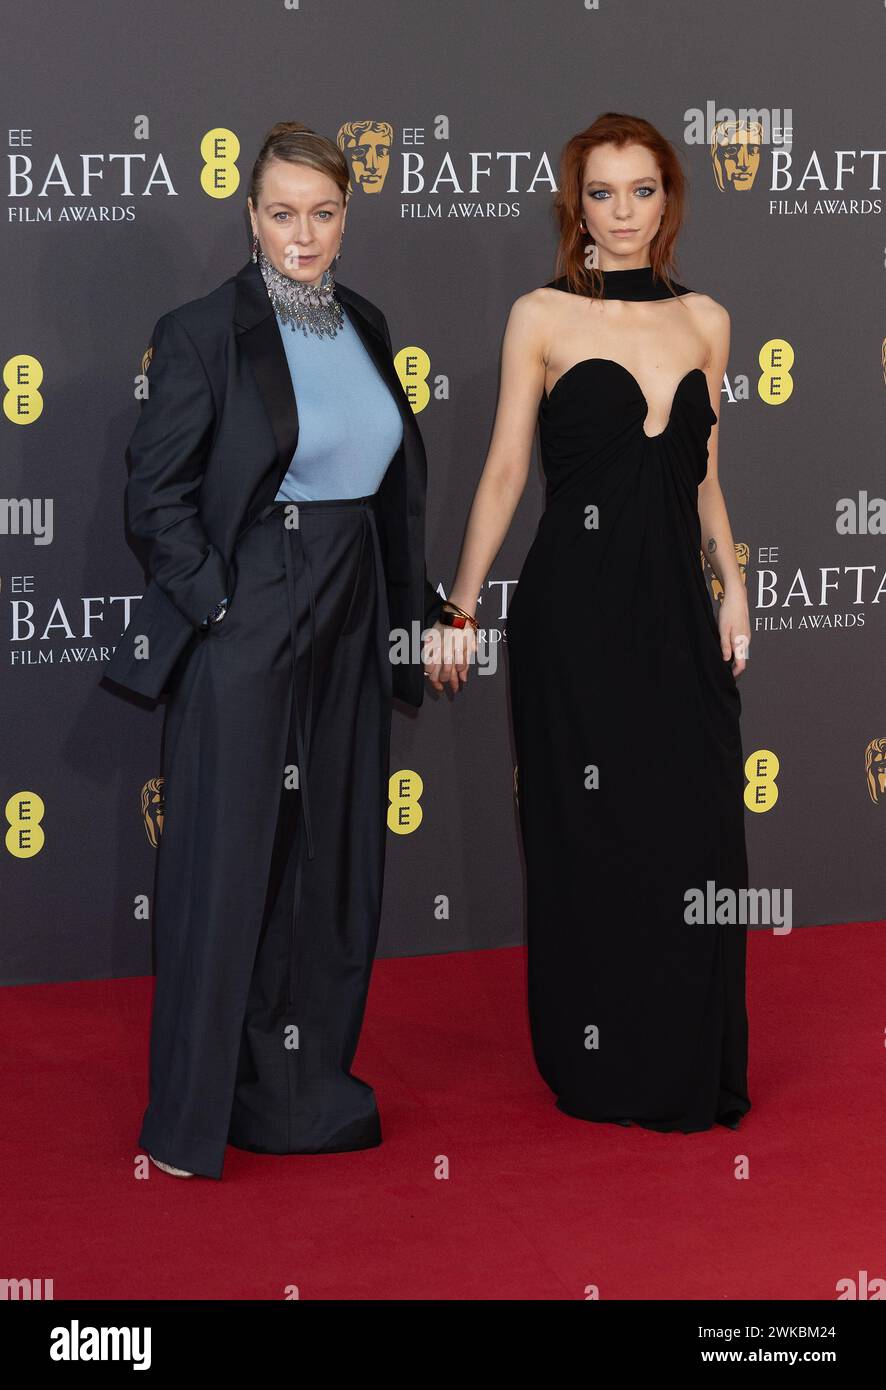 London, UK. February 18th, 2024.  Samantha Morton and Esmee Creed Miles attend the 77th, EE BAFTA Film Awards, Arrivals, 2024 at the Royal Festival Hall in London, UK. Credit: S.A.M./Alamy Live News Stock Photo